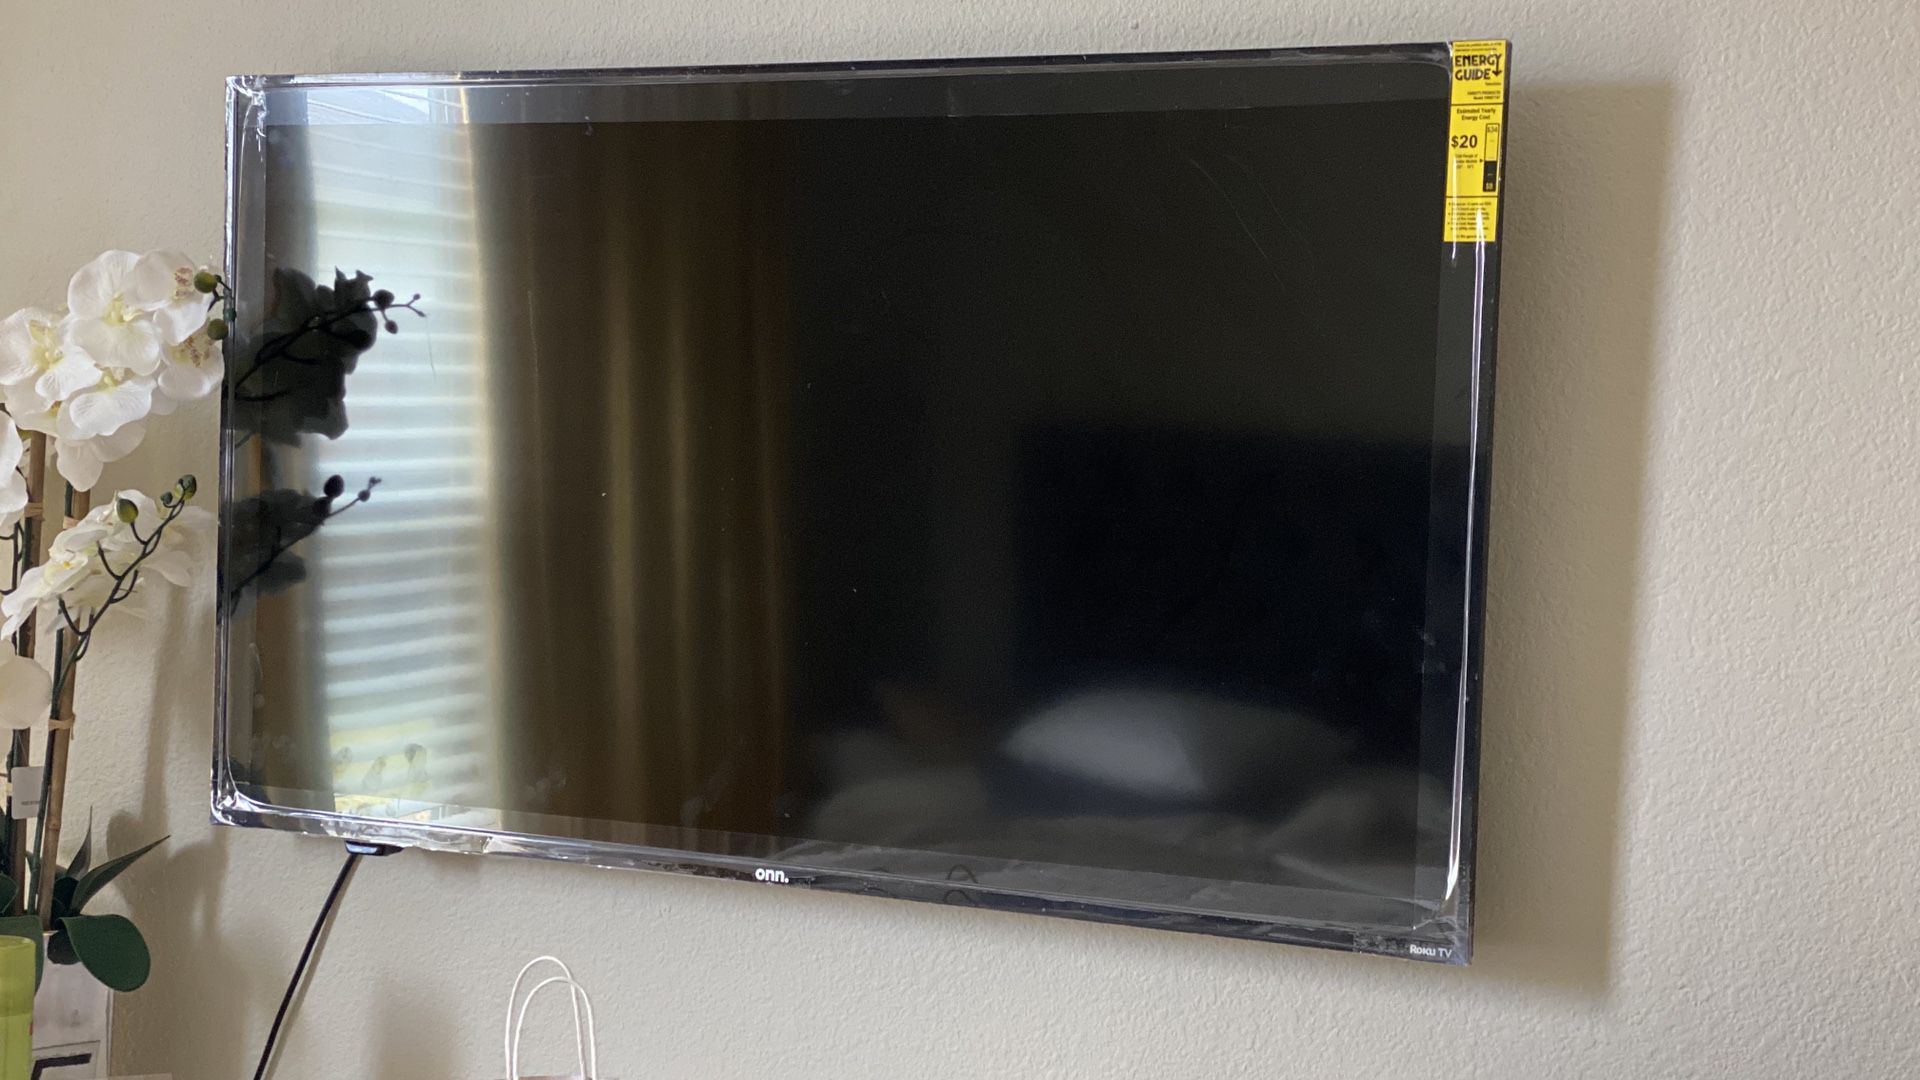 TVs For Sale